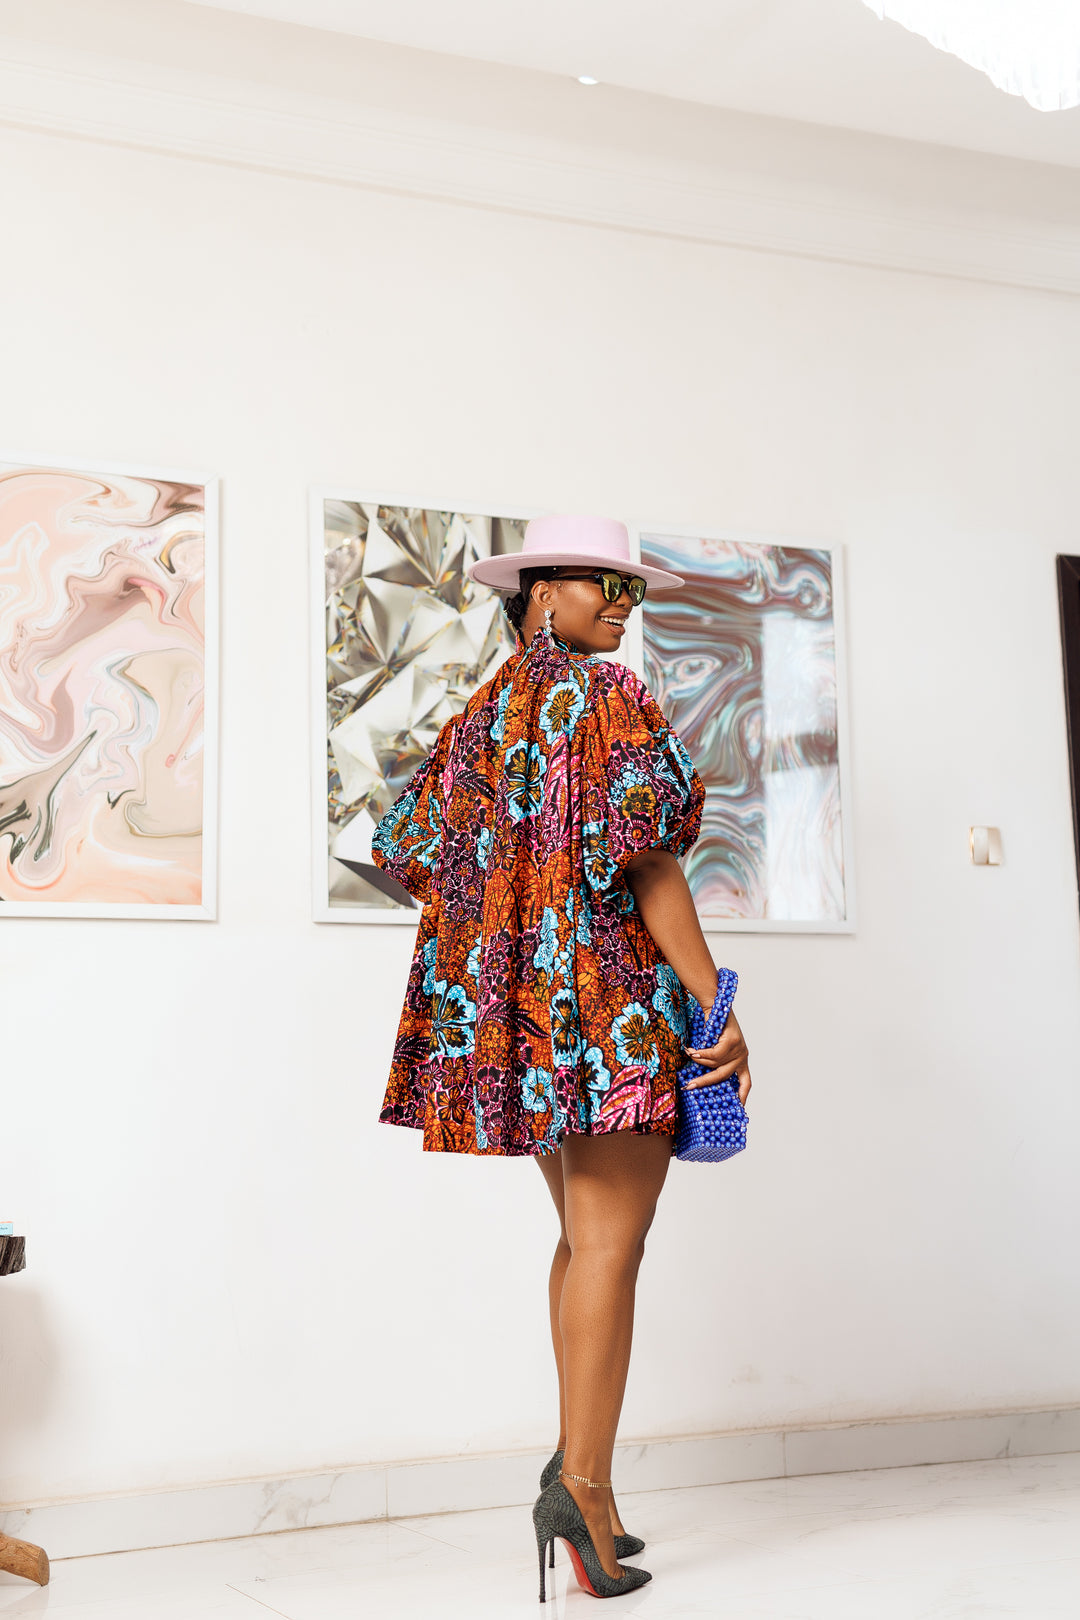 A woman posing in a multicolored African print mini dress.